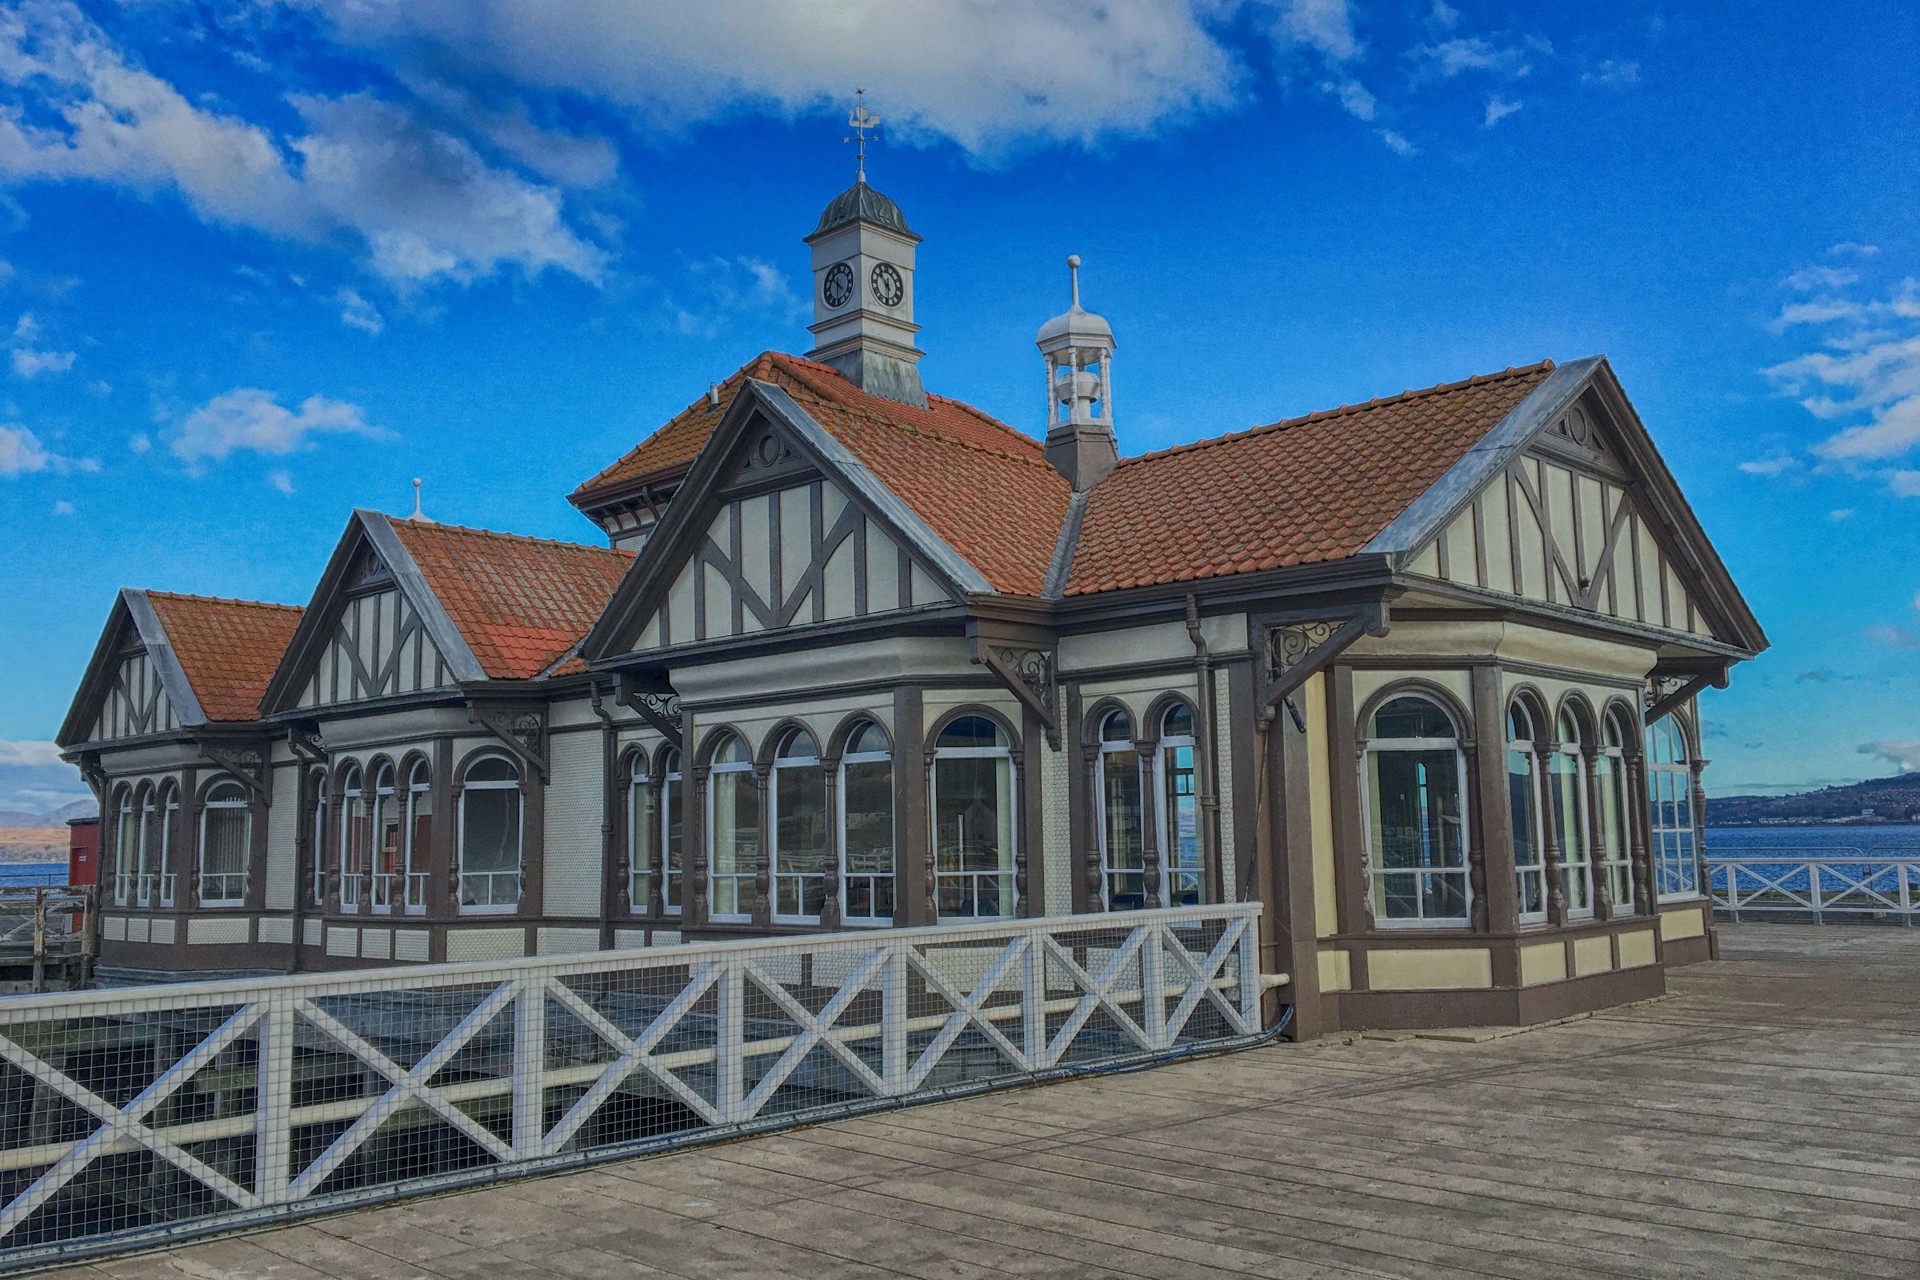 Background image - Dunoon Pier